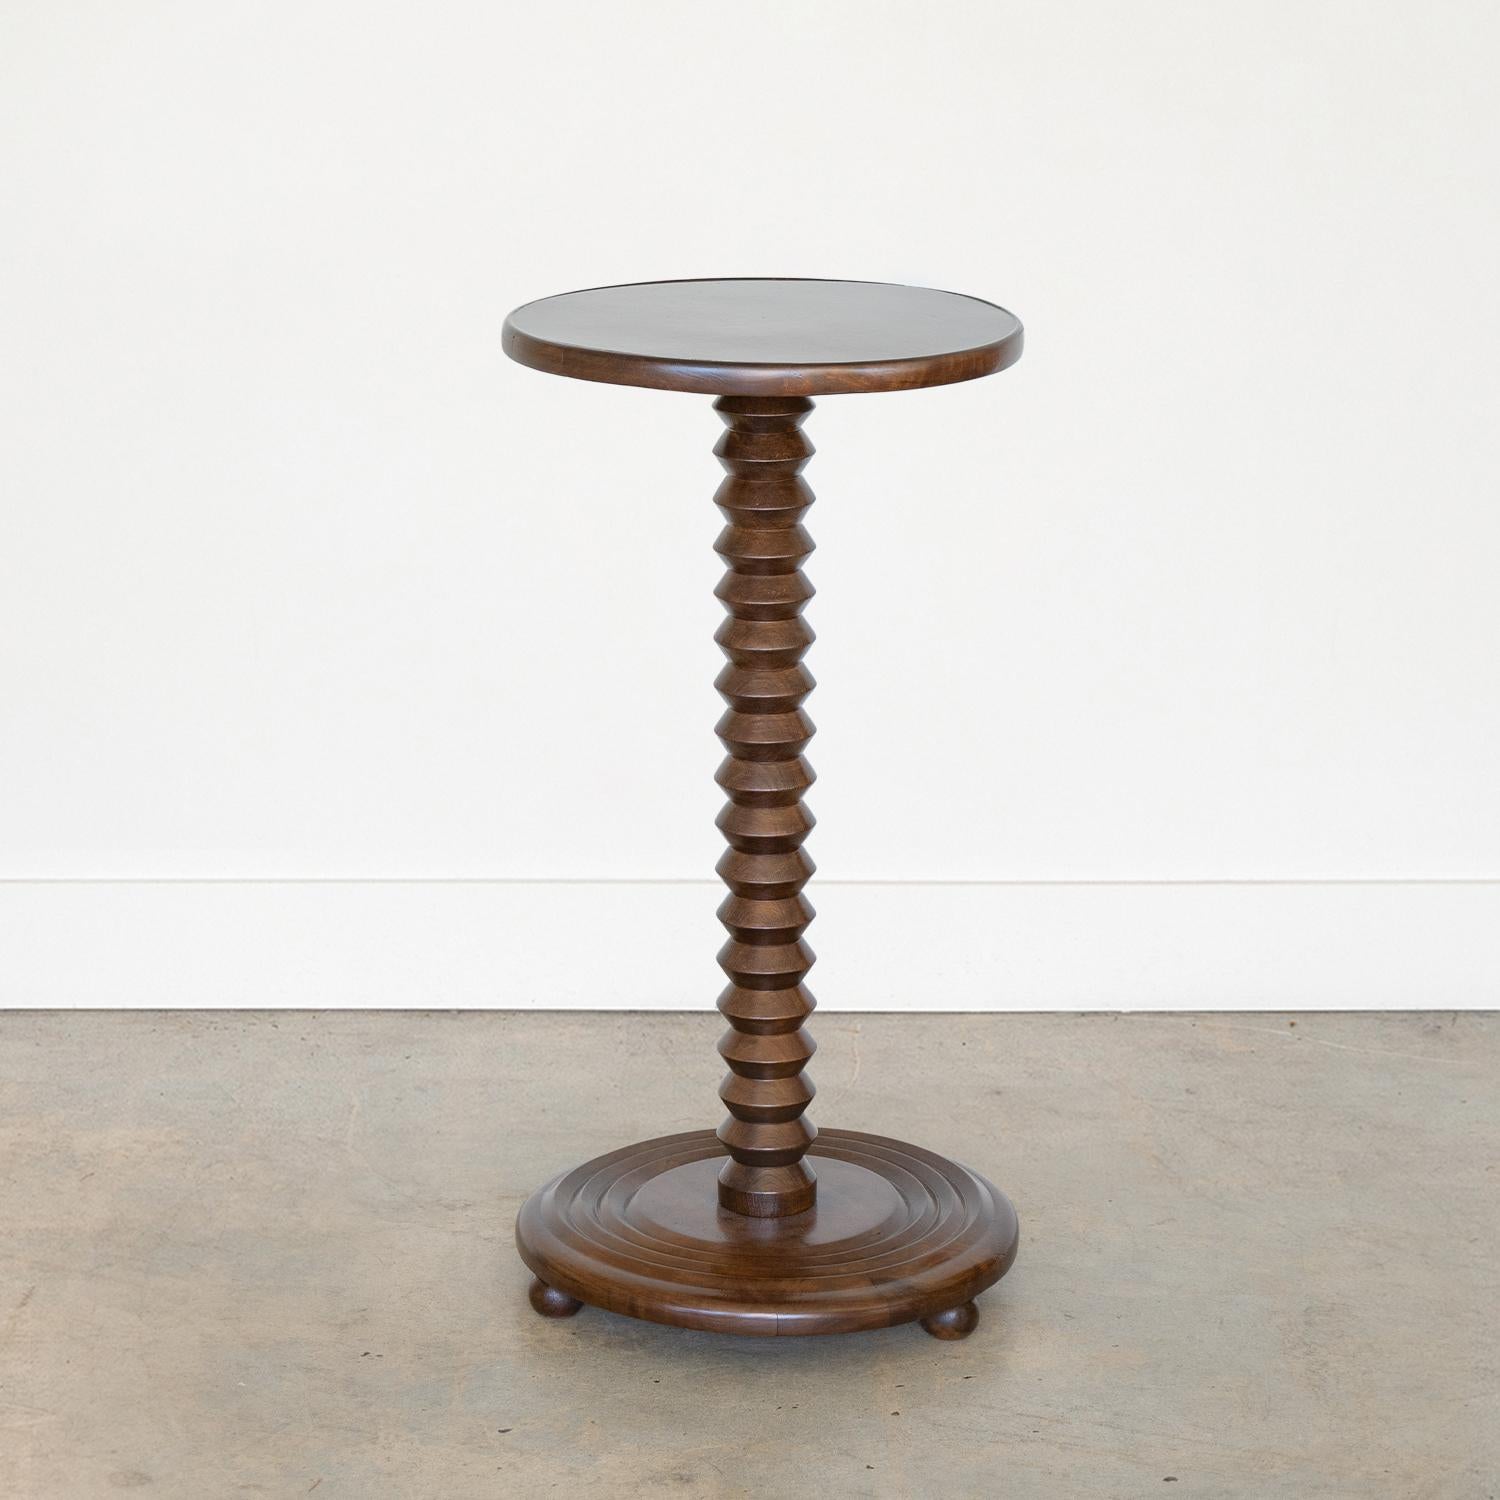 Beautiful carved wood table by Charles Dudouyt, made in France, 1940's. Thick carved oak stem with circular top and three wood ball feet on circular base. Newly refinished dark oak stain.